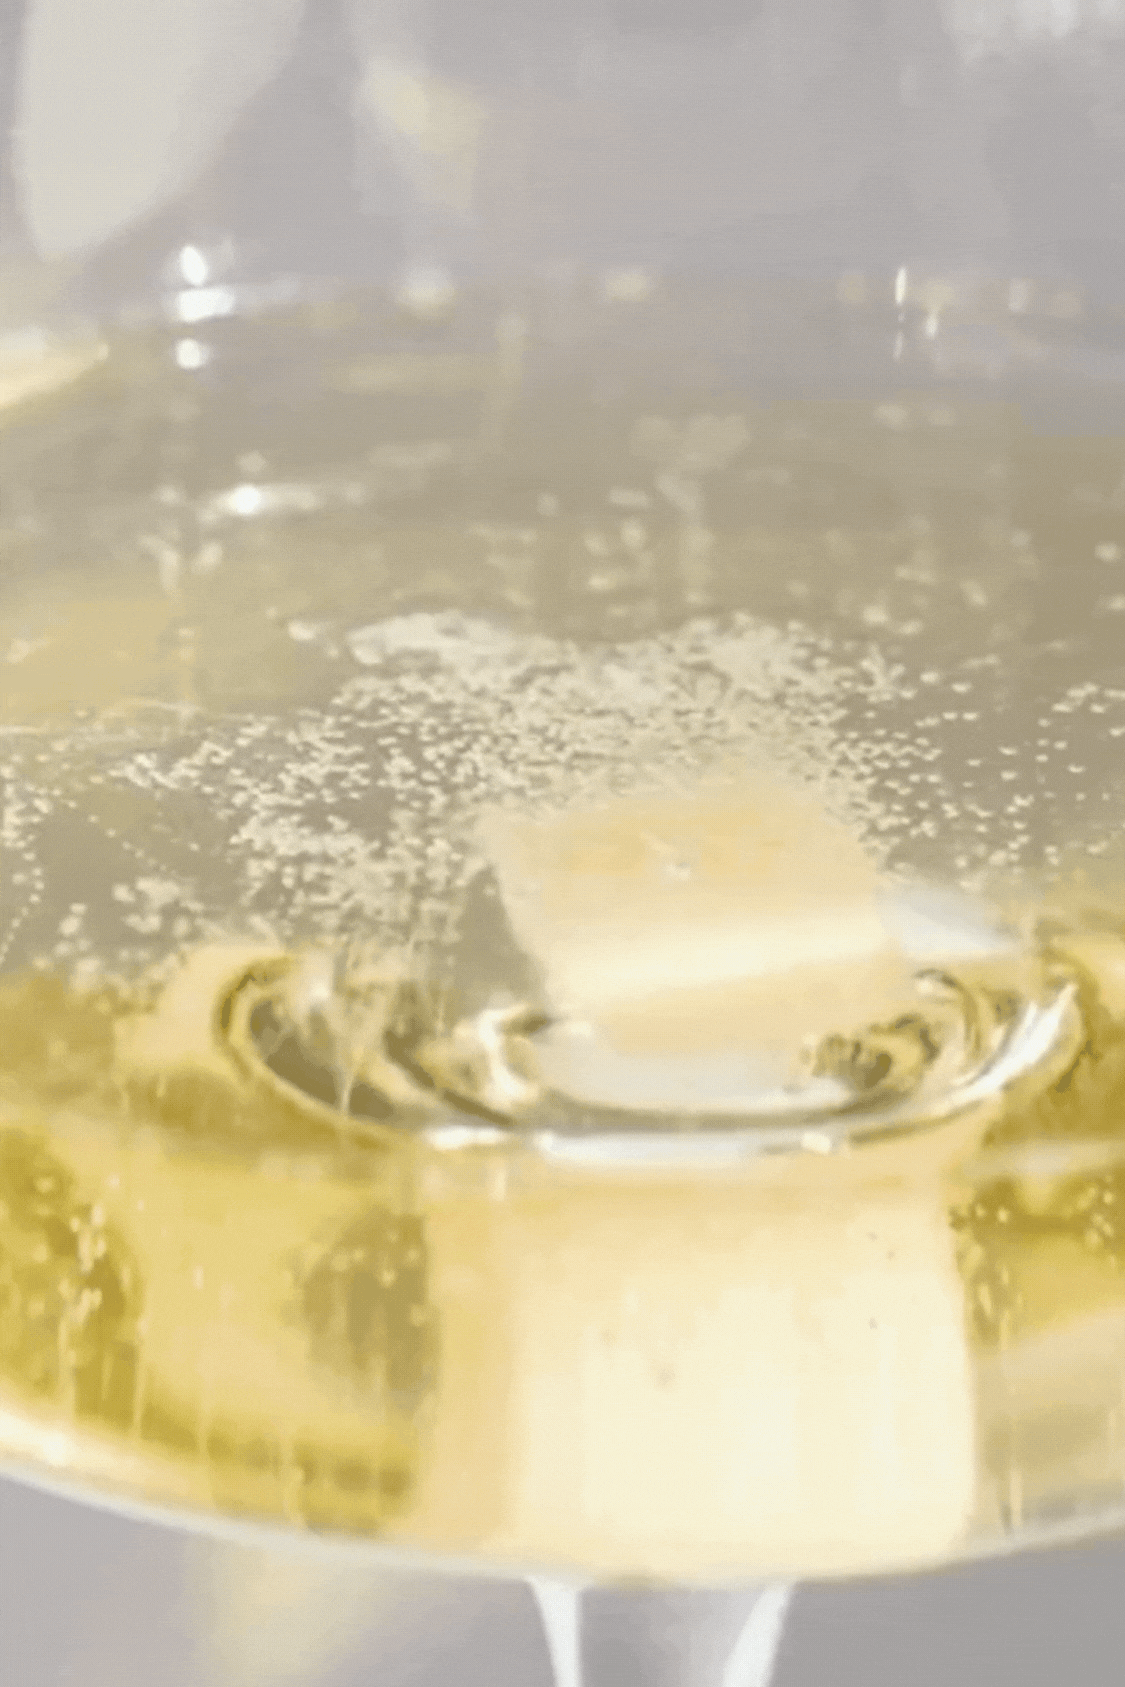 Mimosa Sugar Cubes for Mixology – The Robyn's Nest Boutique